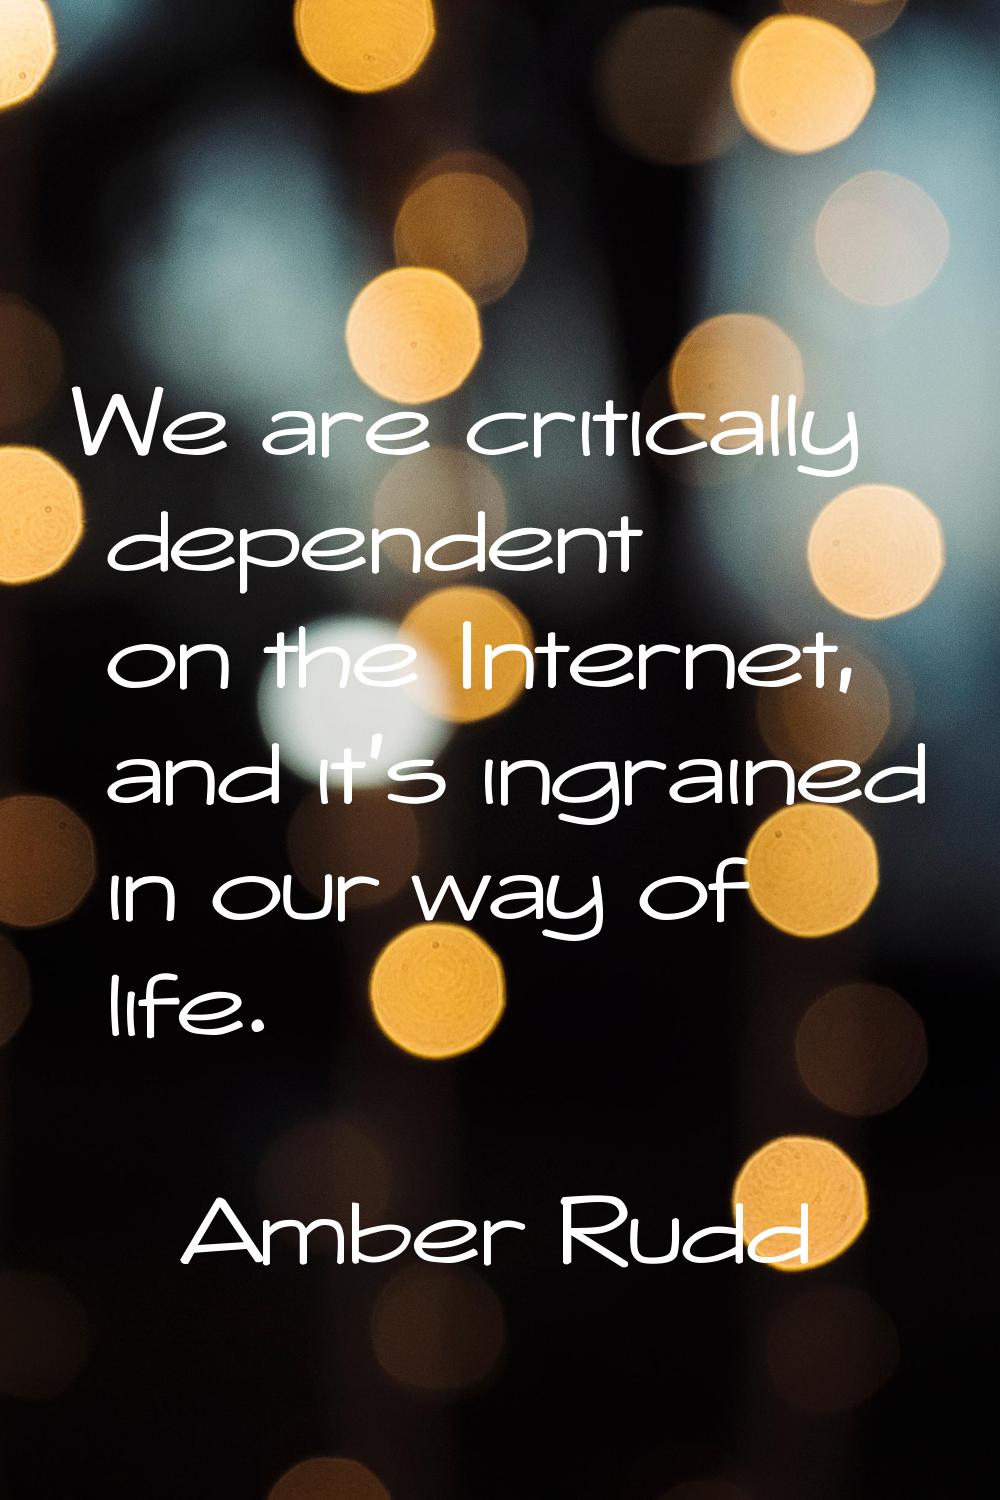 We are critically dependent on the Internet, and it's ingrained in our way of life.